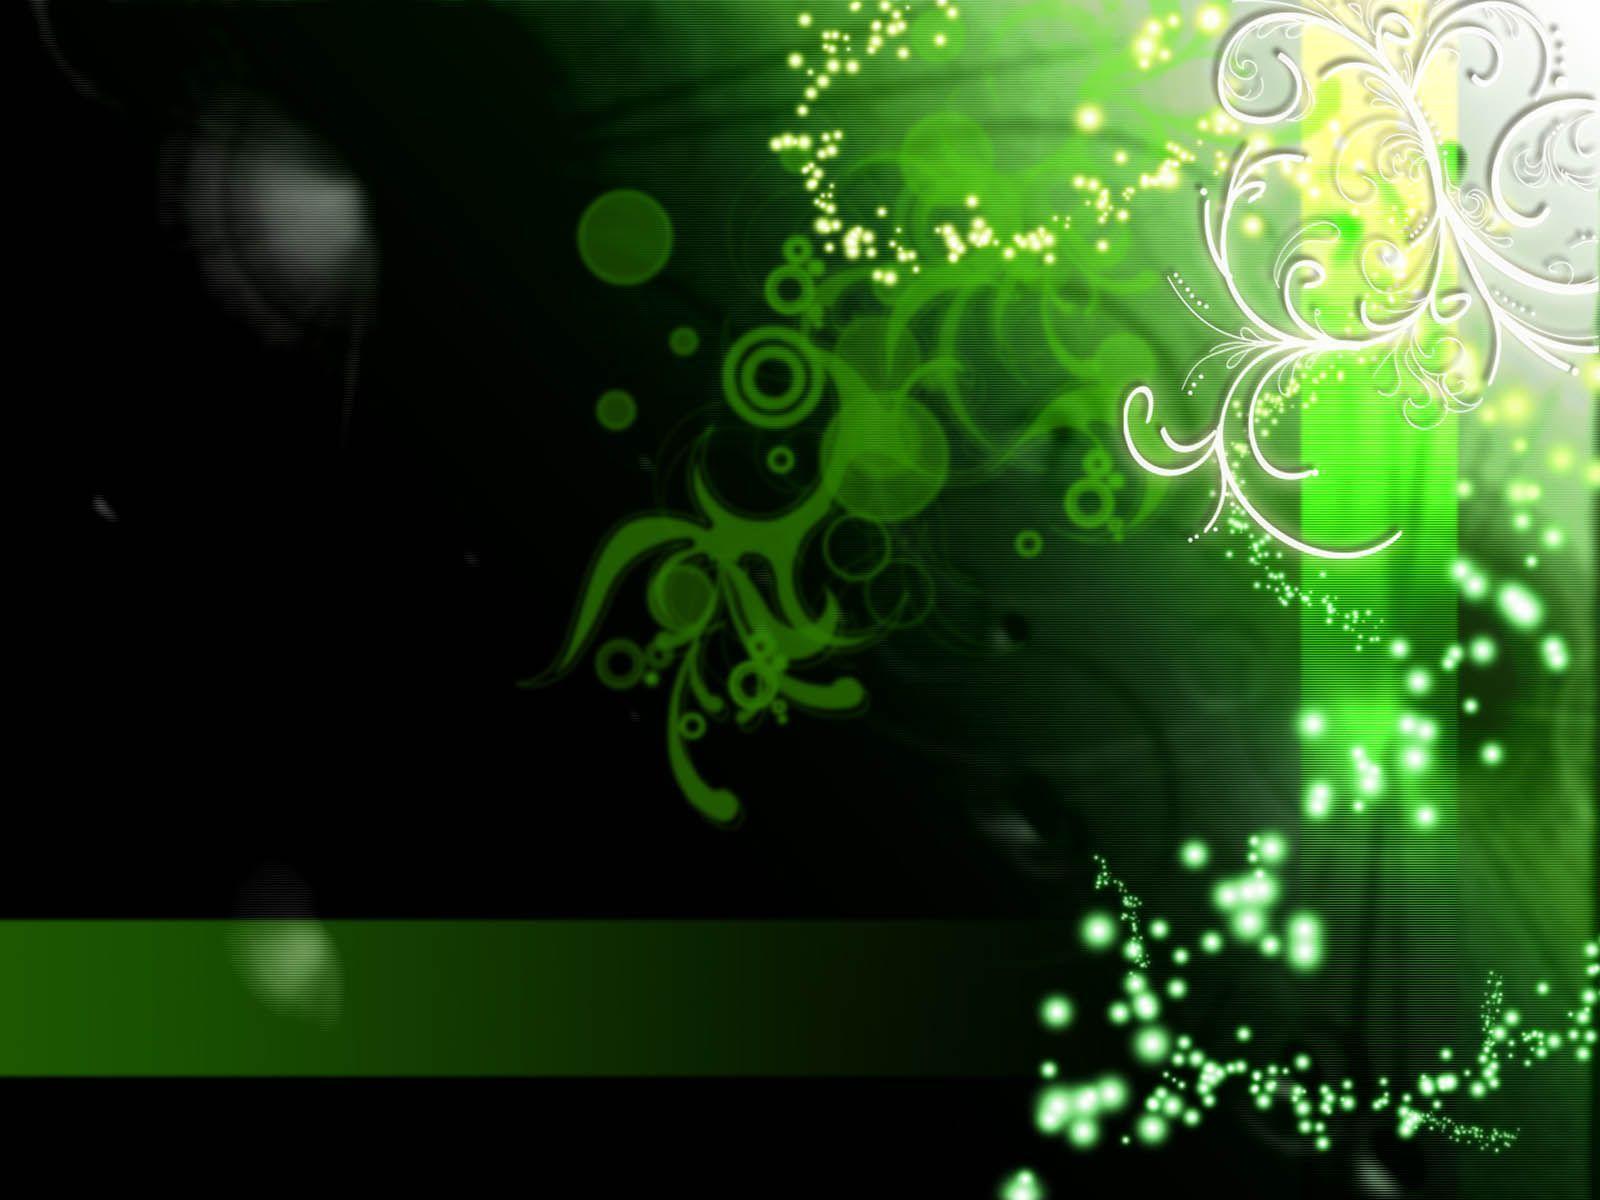 Abstract Green Wallpapers - Wallpaper Cave